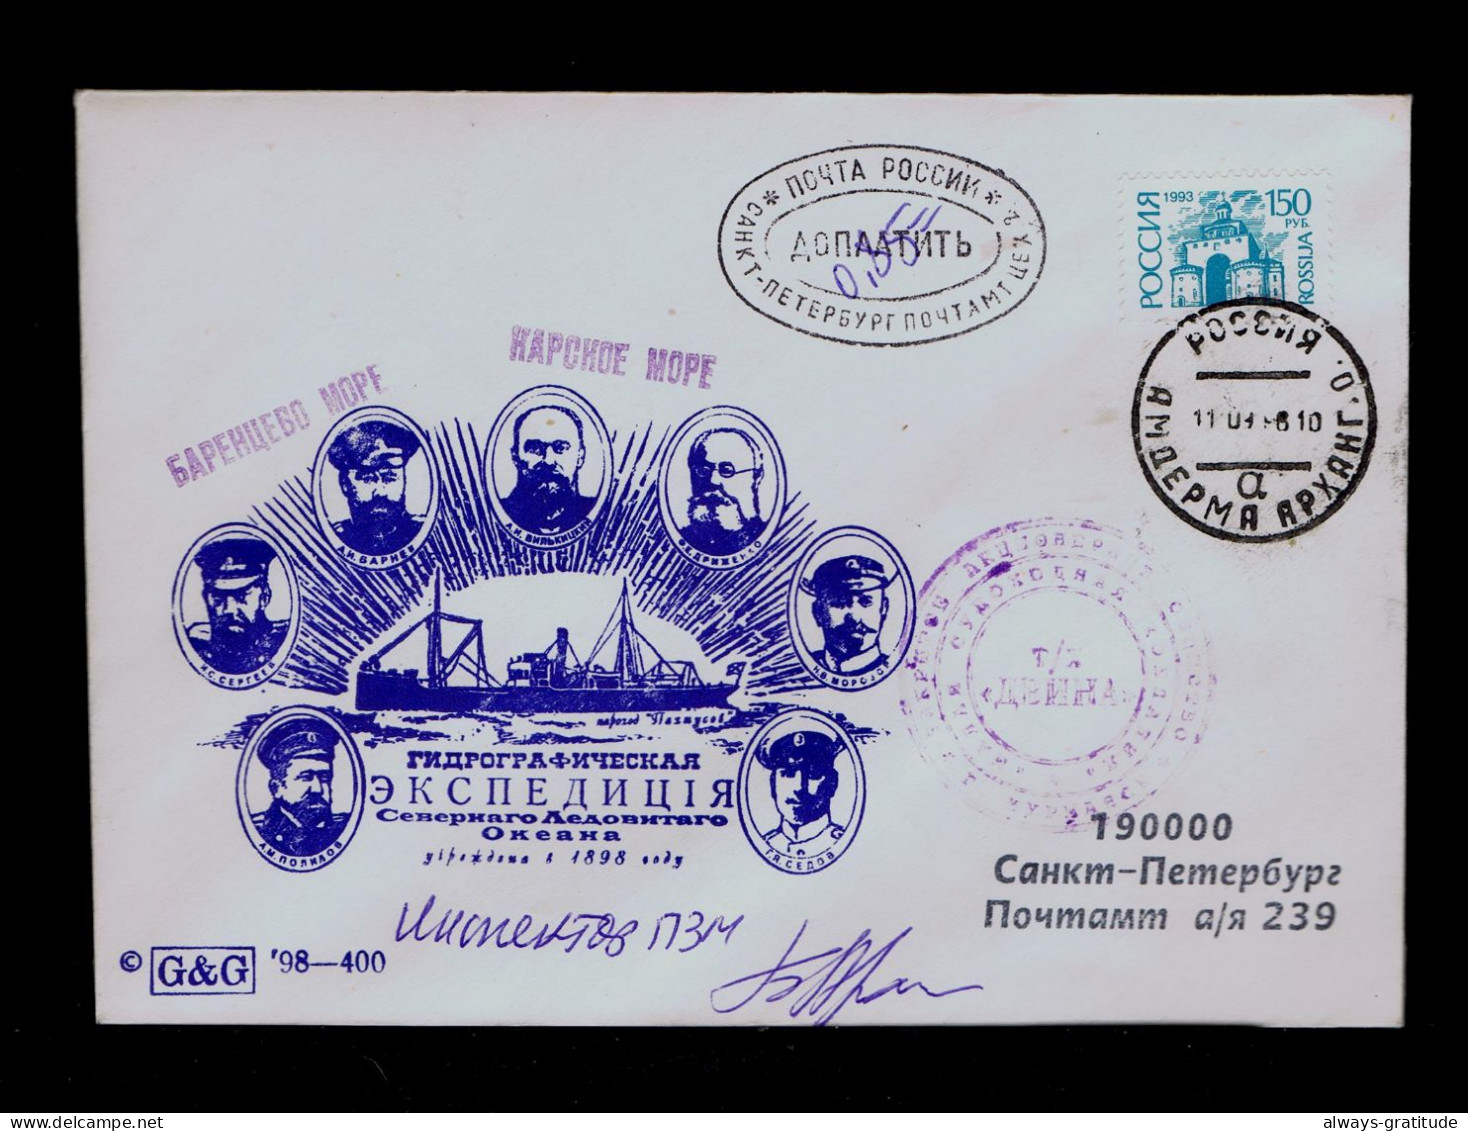 Sp10448 RUSSIE SERGEER VILKITSKY "DRIZHENKO" Hidrography Survey Artic Nord Ship DVINA Anderma Cover Postal Stationery - Arctic Expeditions